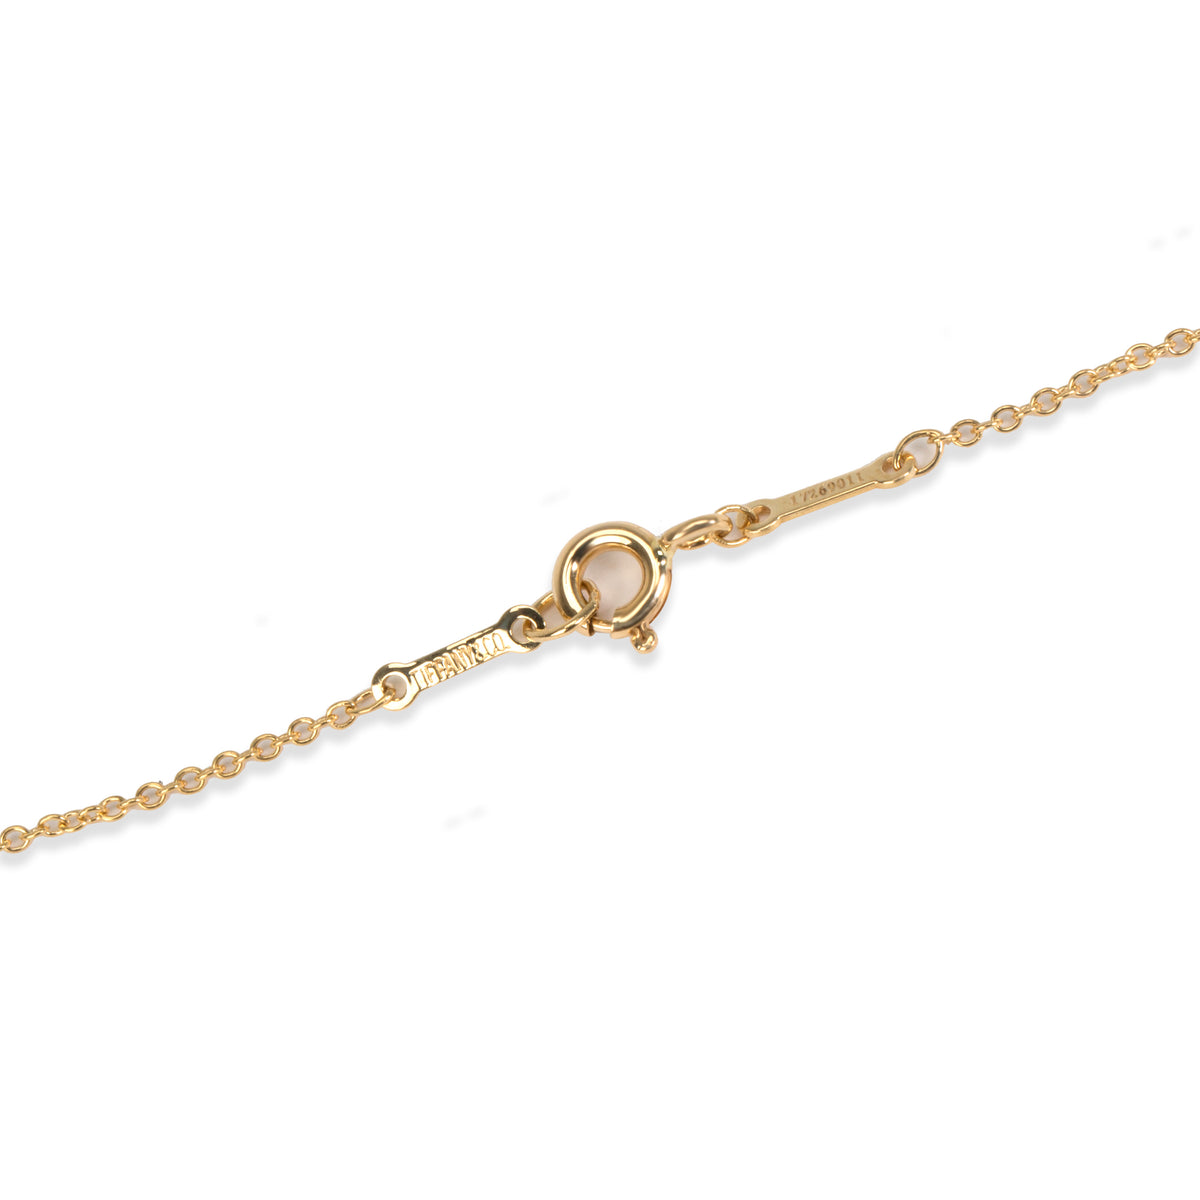 Tiffany & Co. Diamonds by the Yard Diamond Necklace in 18K Yellow Gold 0.30 CTW